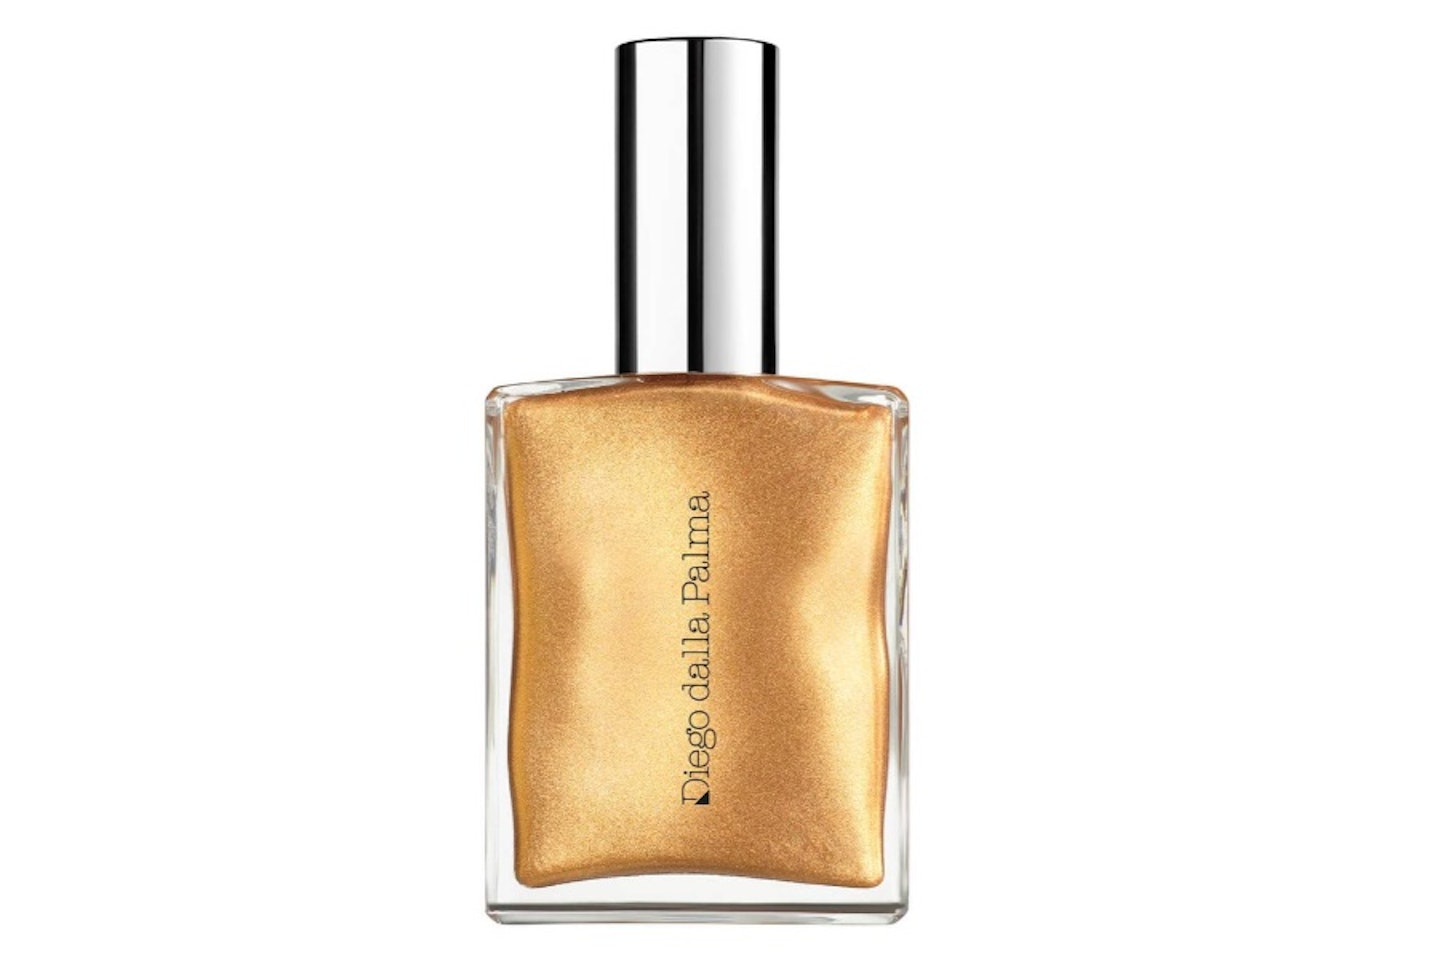 Diego Dalla Palma My Gold-Ness Face and Body Glow Oil 60ml